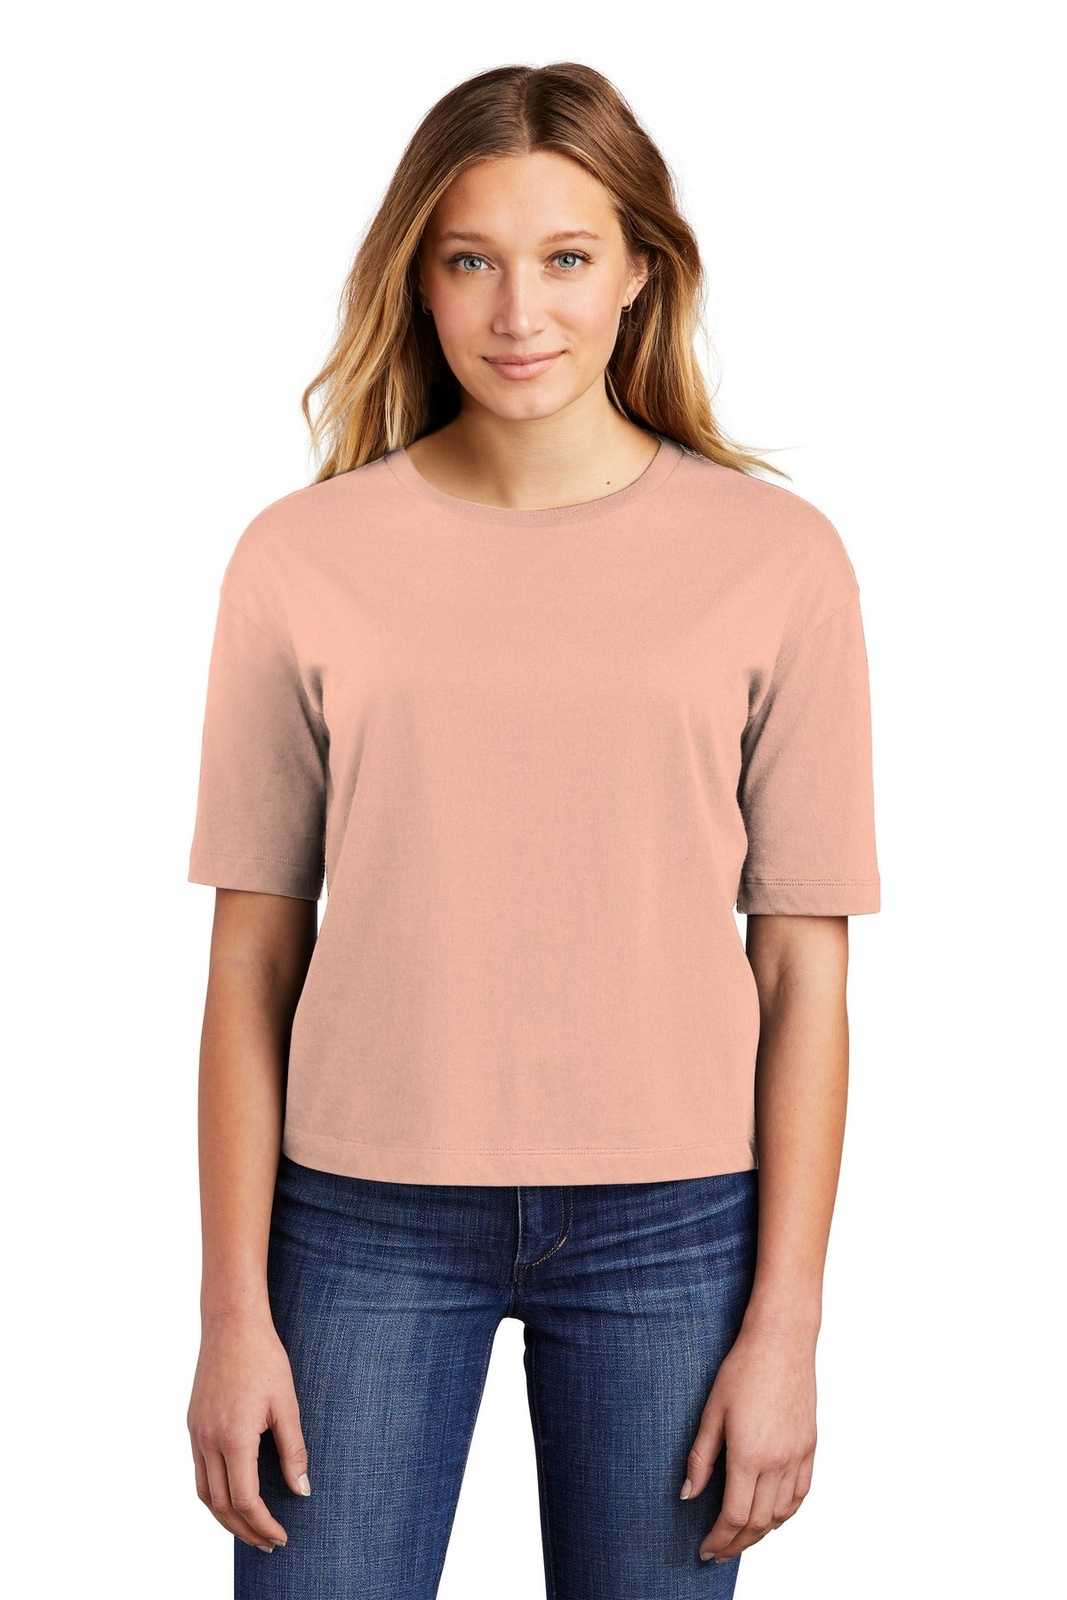 District DT6402 Women's V.I.T. Boxy Tee - Dusty Peach - HIT a Double - 1